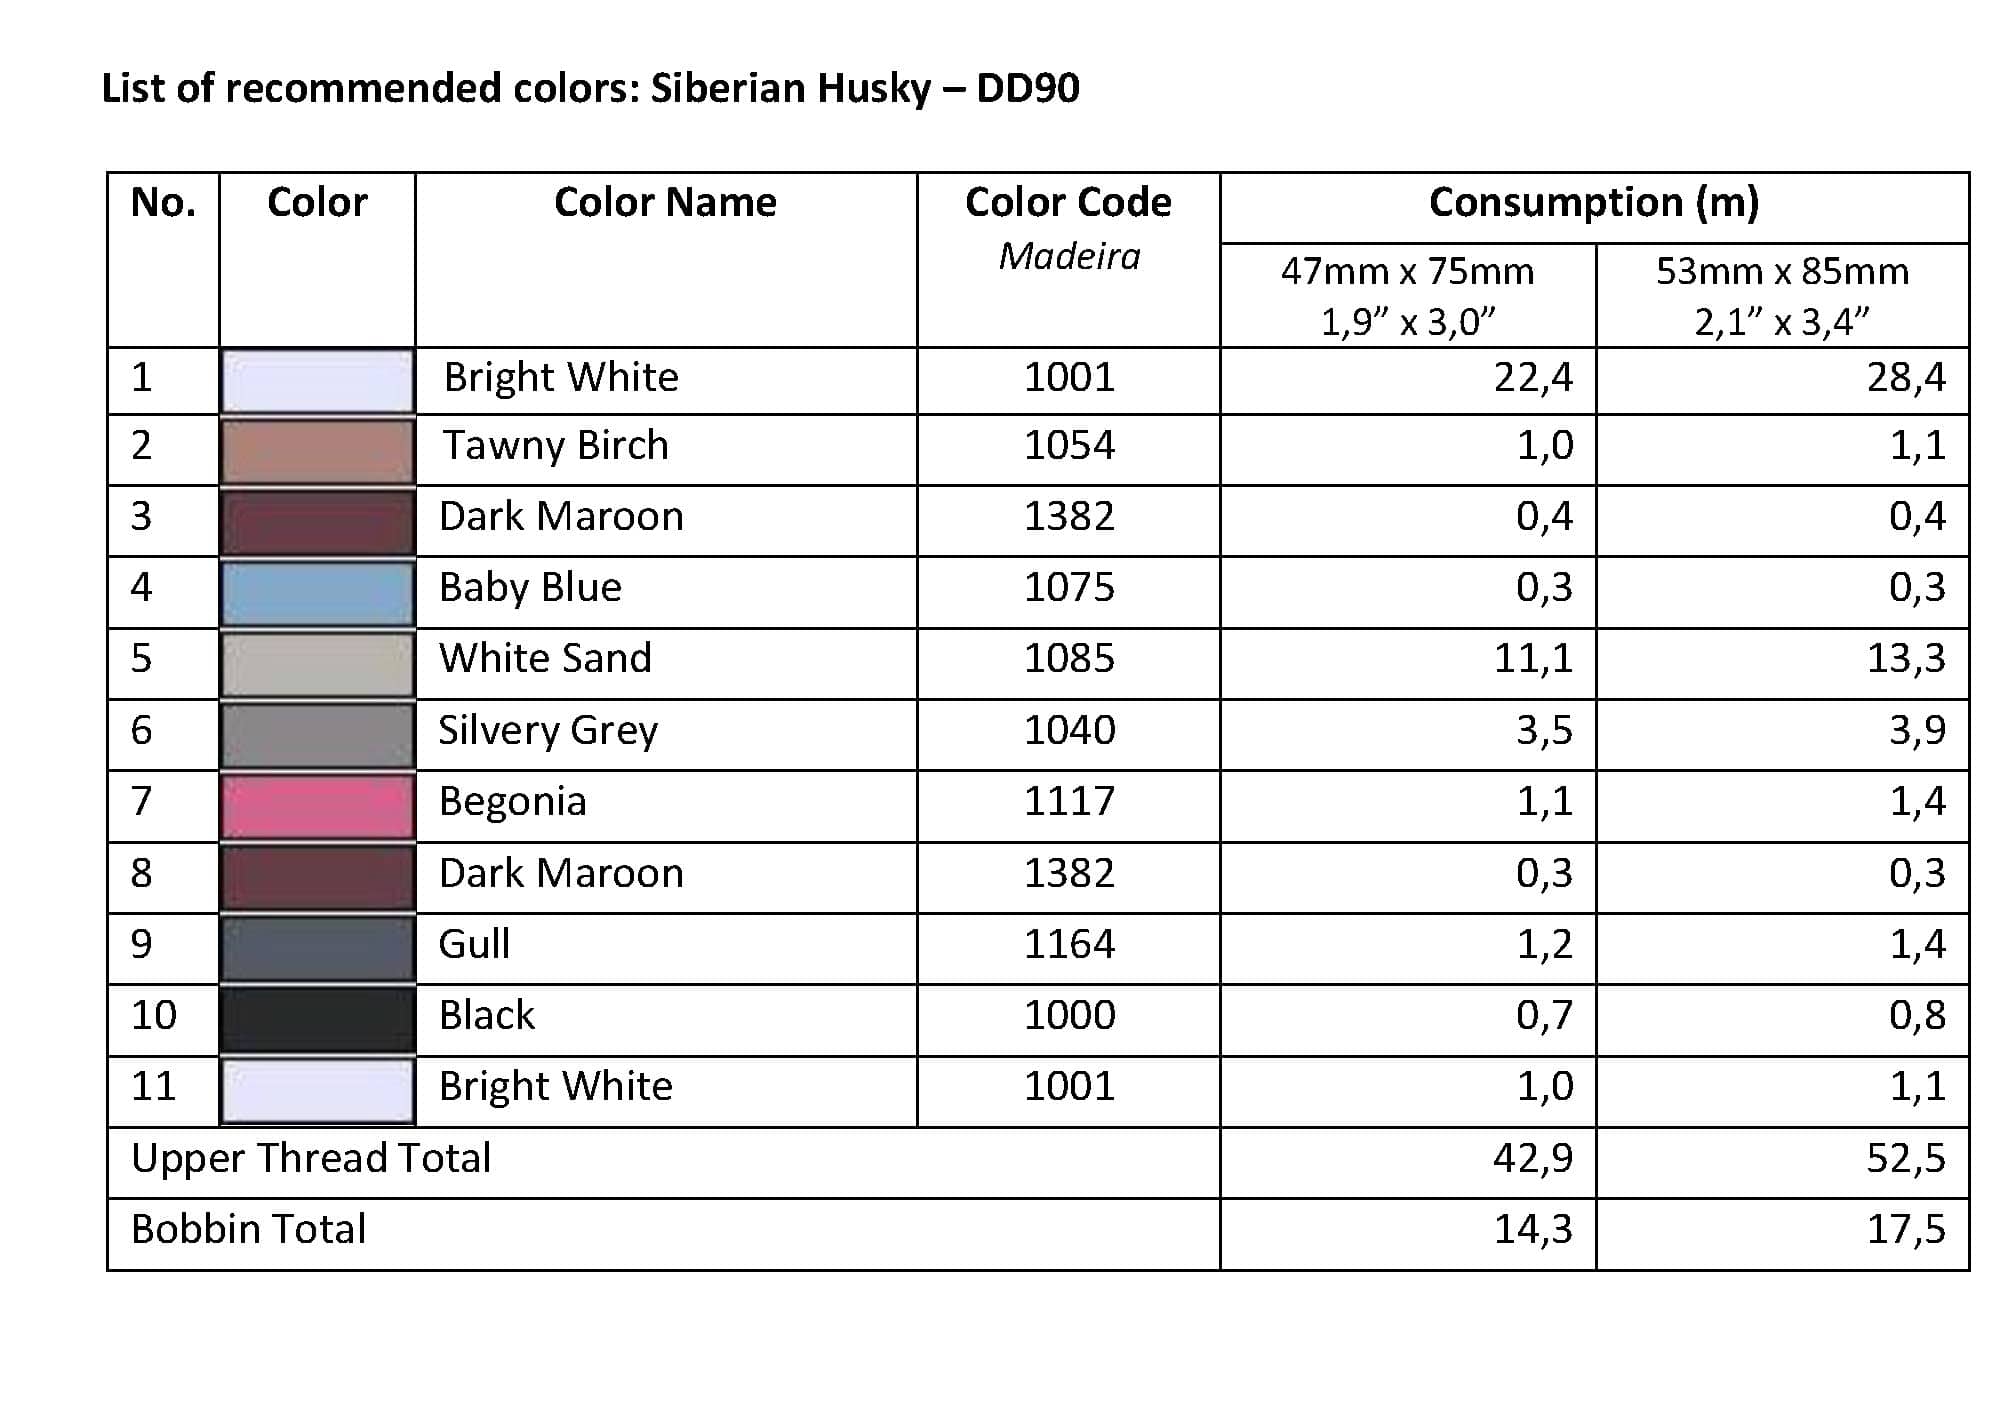 List of Recommended Colors -  Siberian Husky DD89